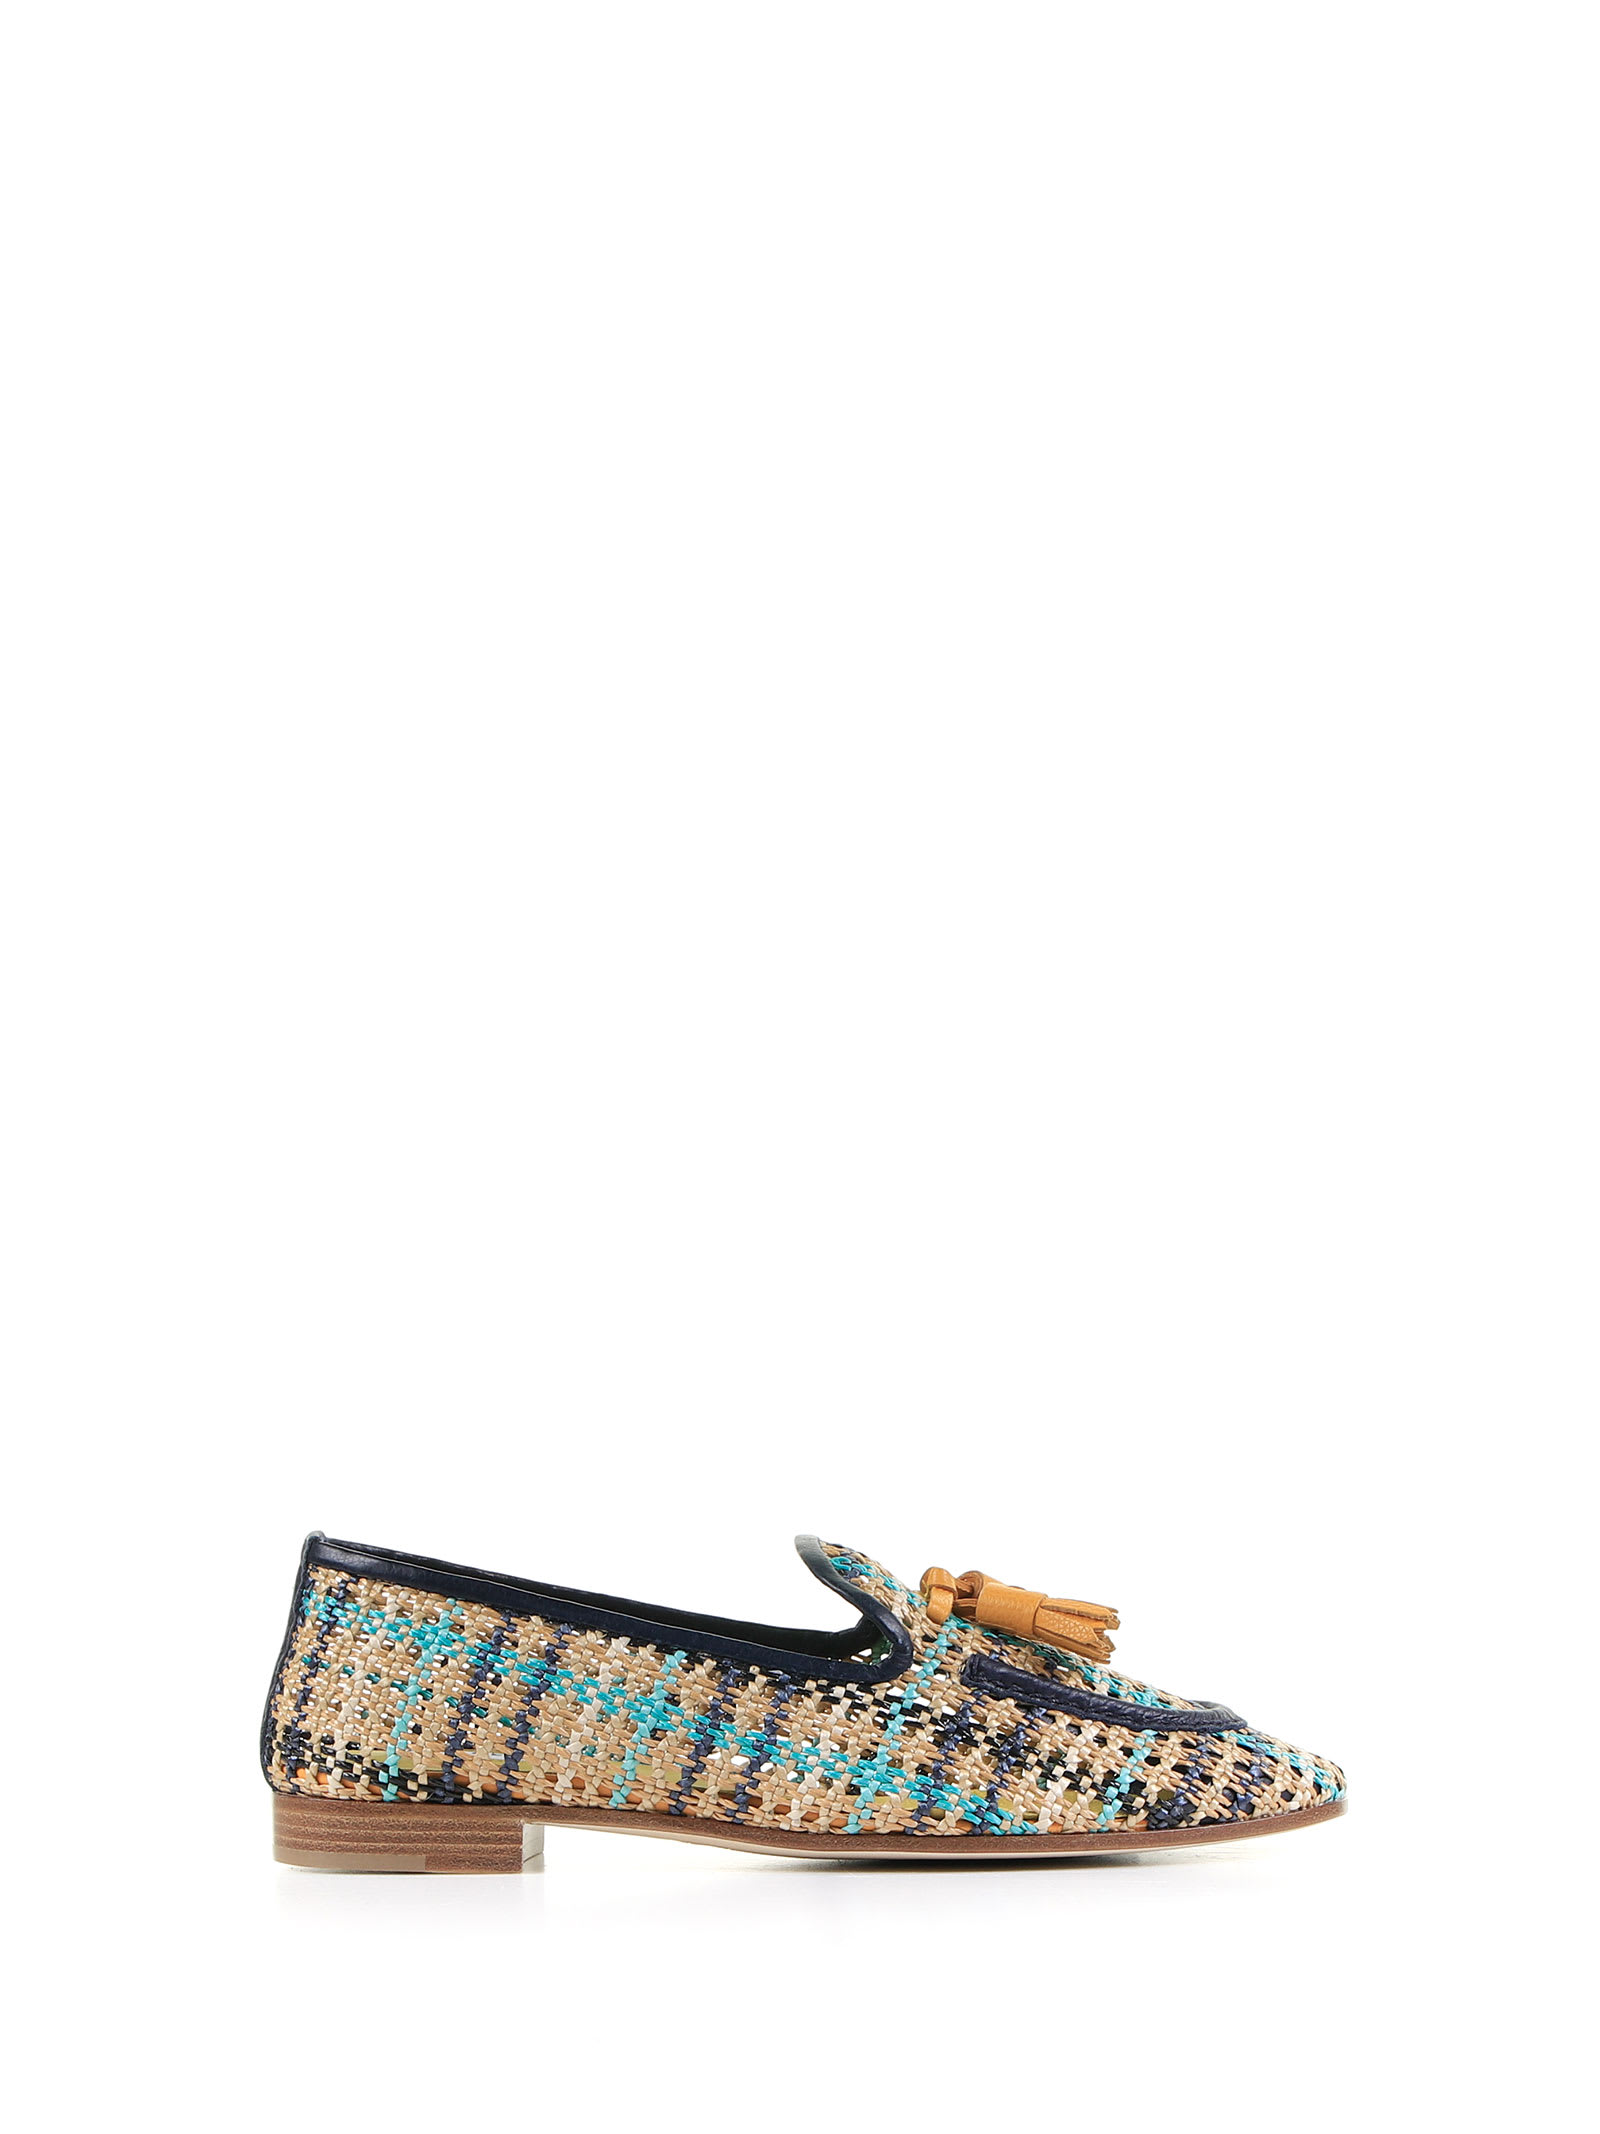 Fratelli Rossetti Loafer In Woven Leather